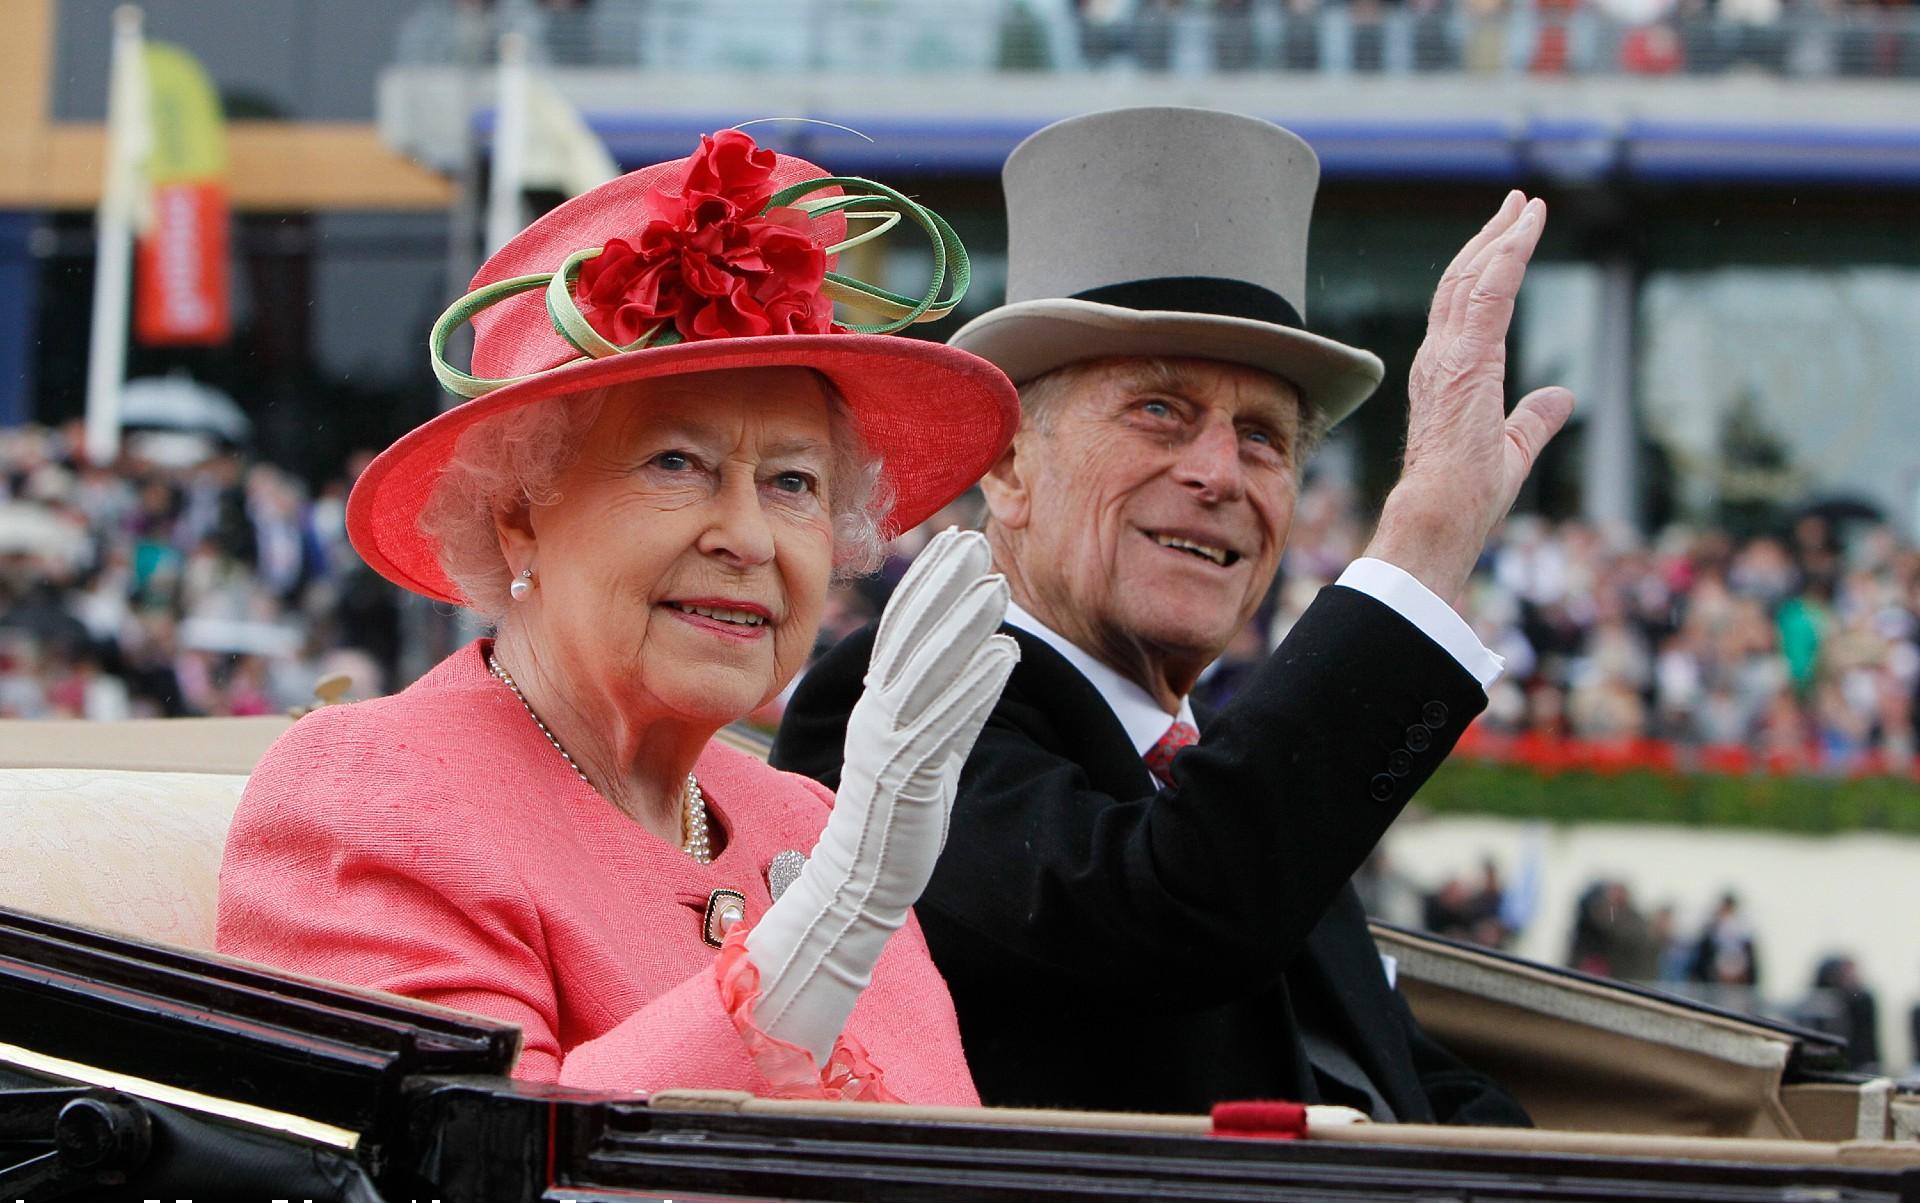 In this Thursday June, 16, 2011 file photo Britain’s Queen Elizabeth II with Prince Philip arrive by horse drawn carriage in the parade ring on the third day, traditionally known as Ladies Day, of the Royal Ascot horse race meeting at Ascot, England. (AP Photo/Alastair Grant, File)